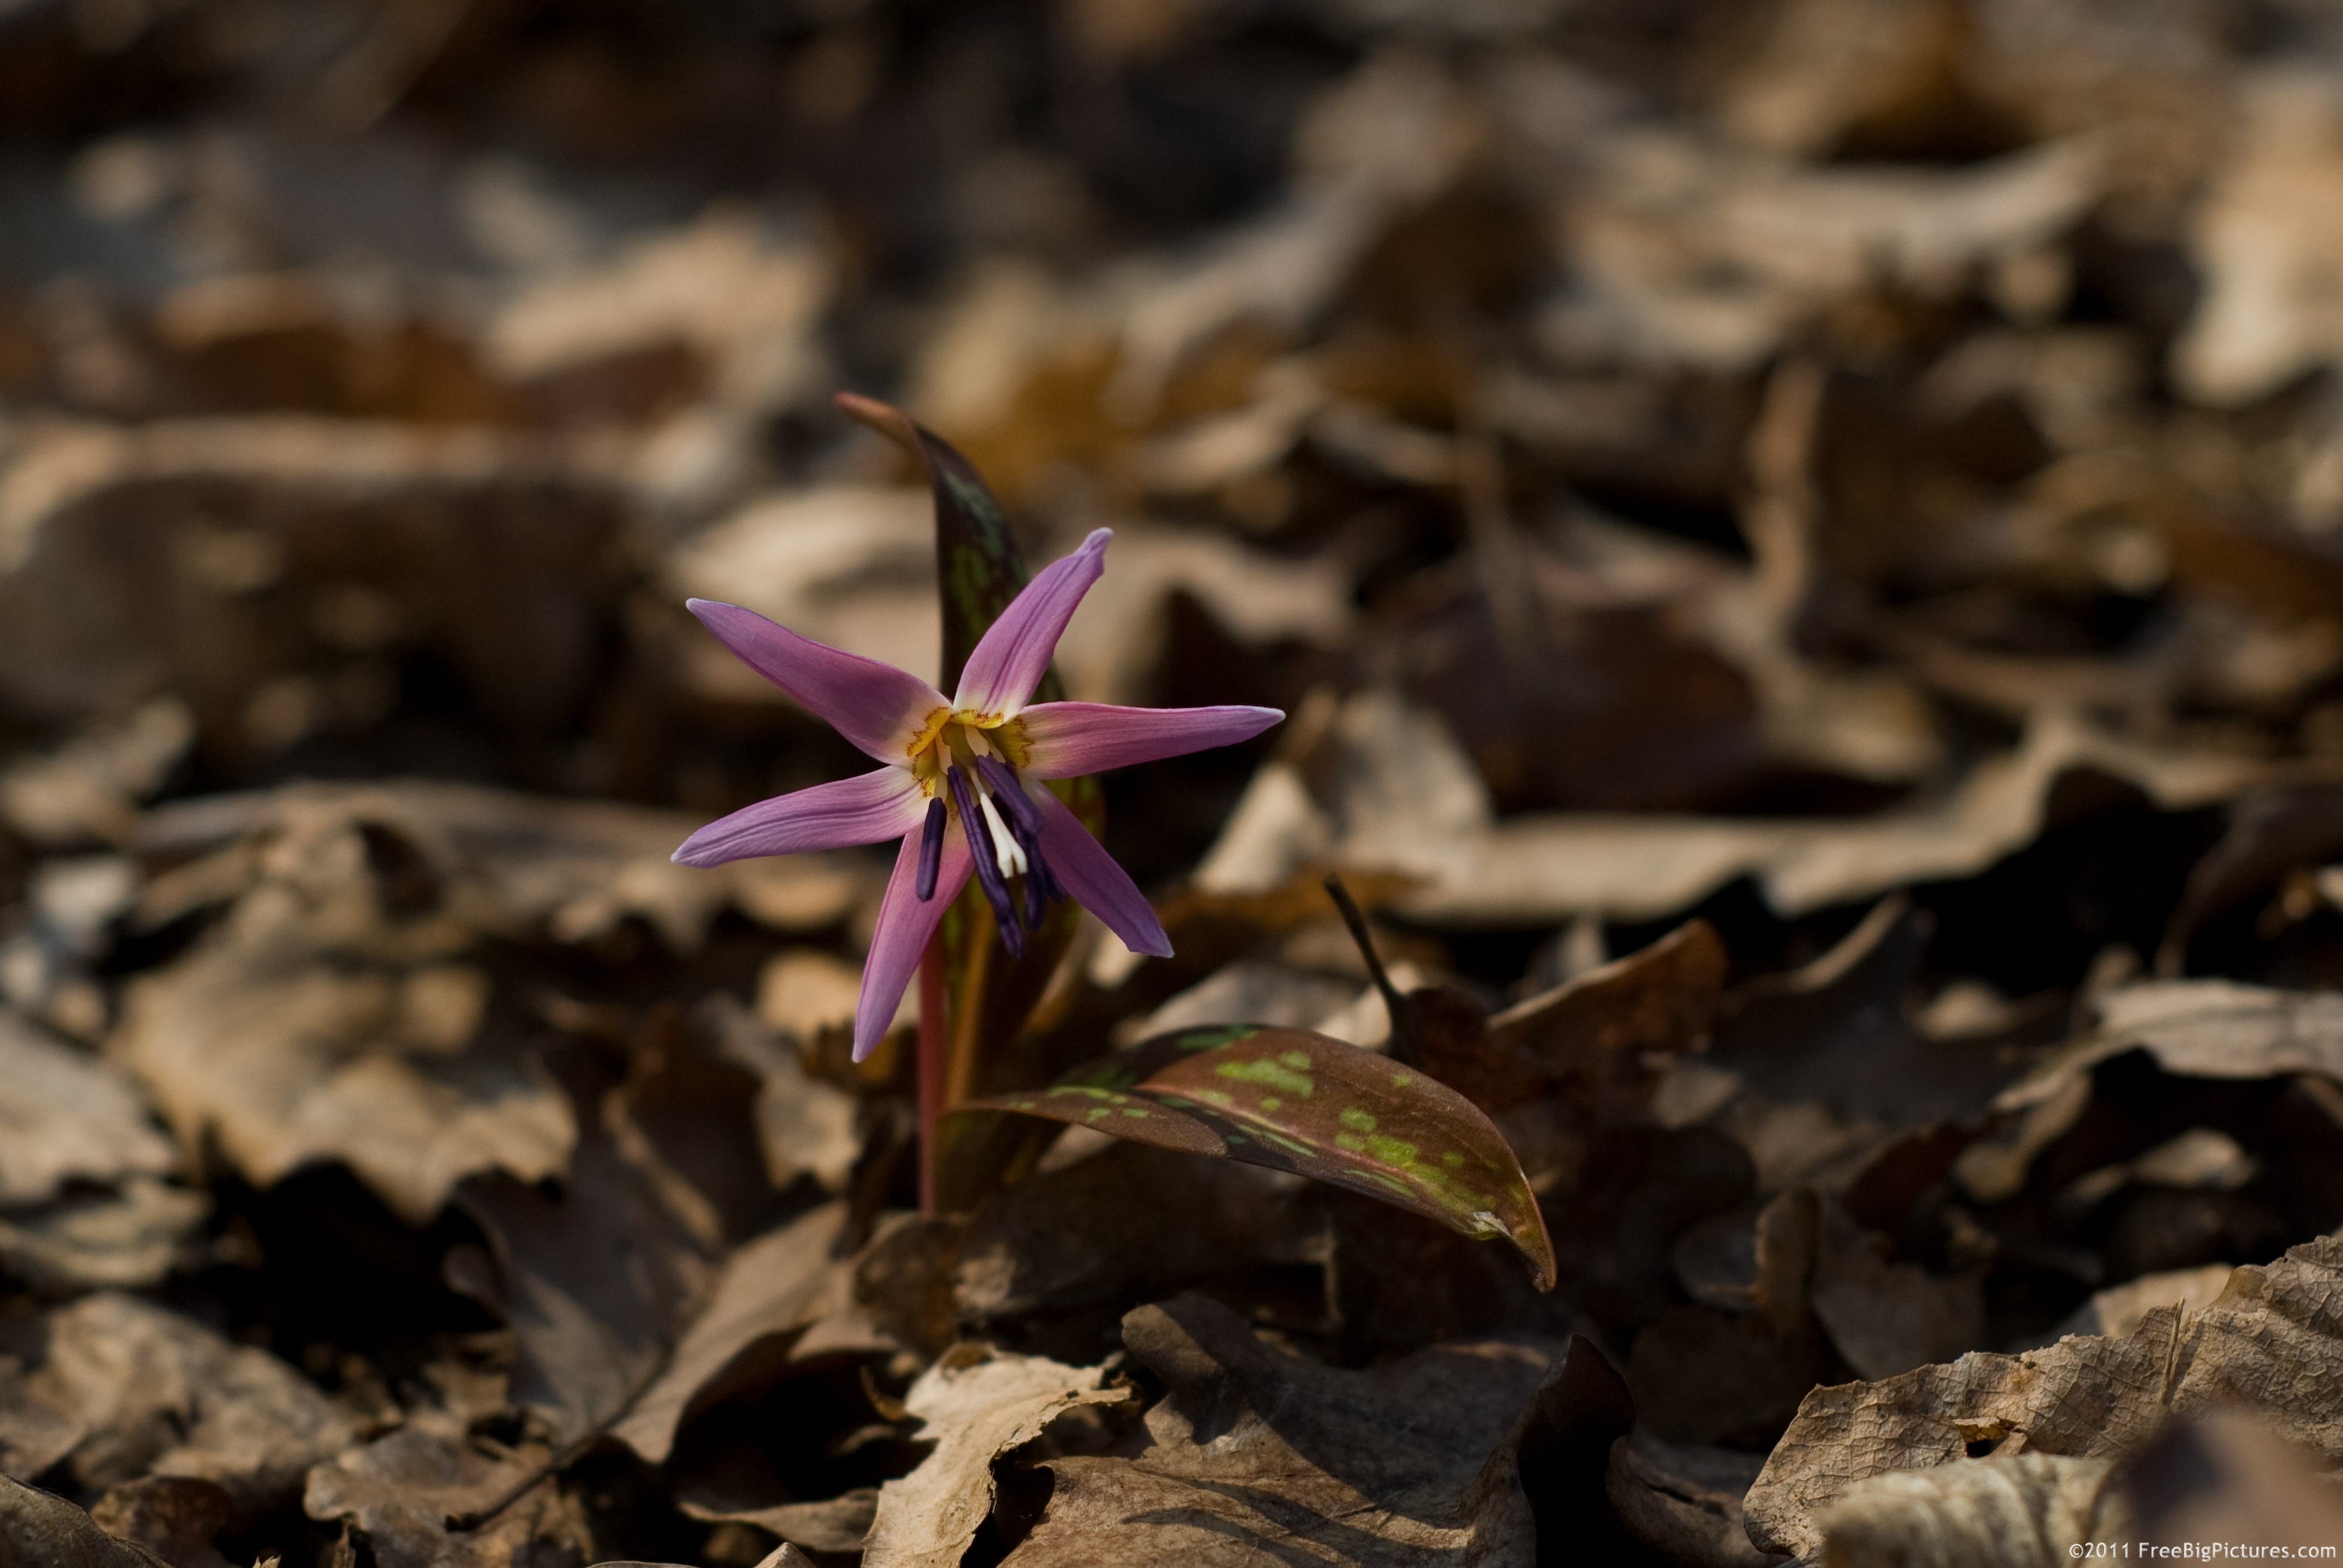 A Dogtooth violet on the soil of a deciduous forest in spring